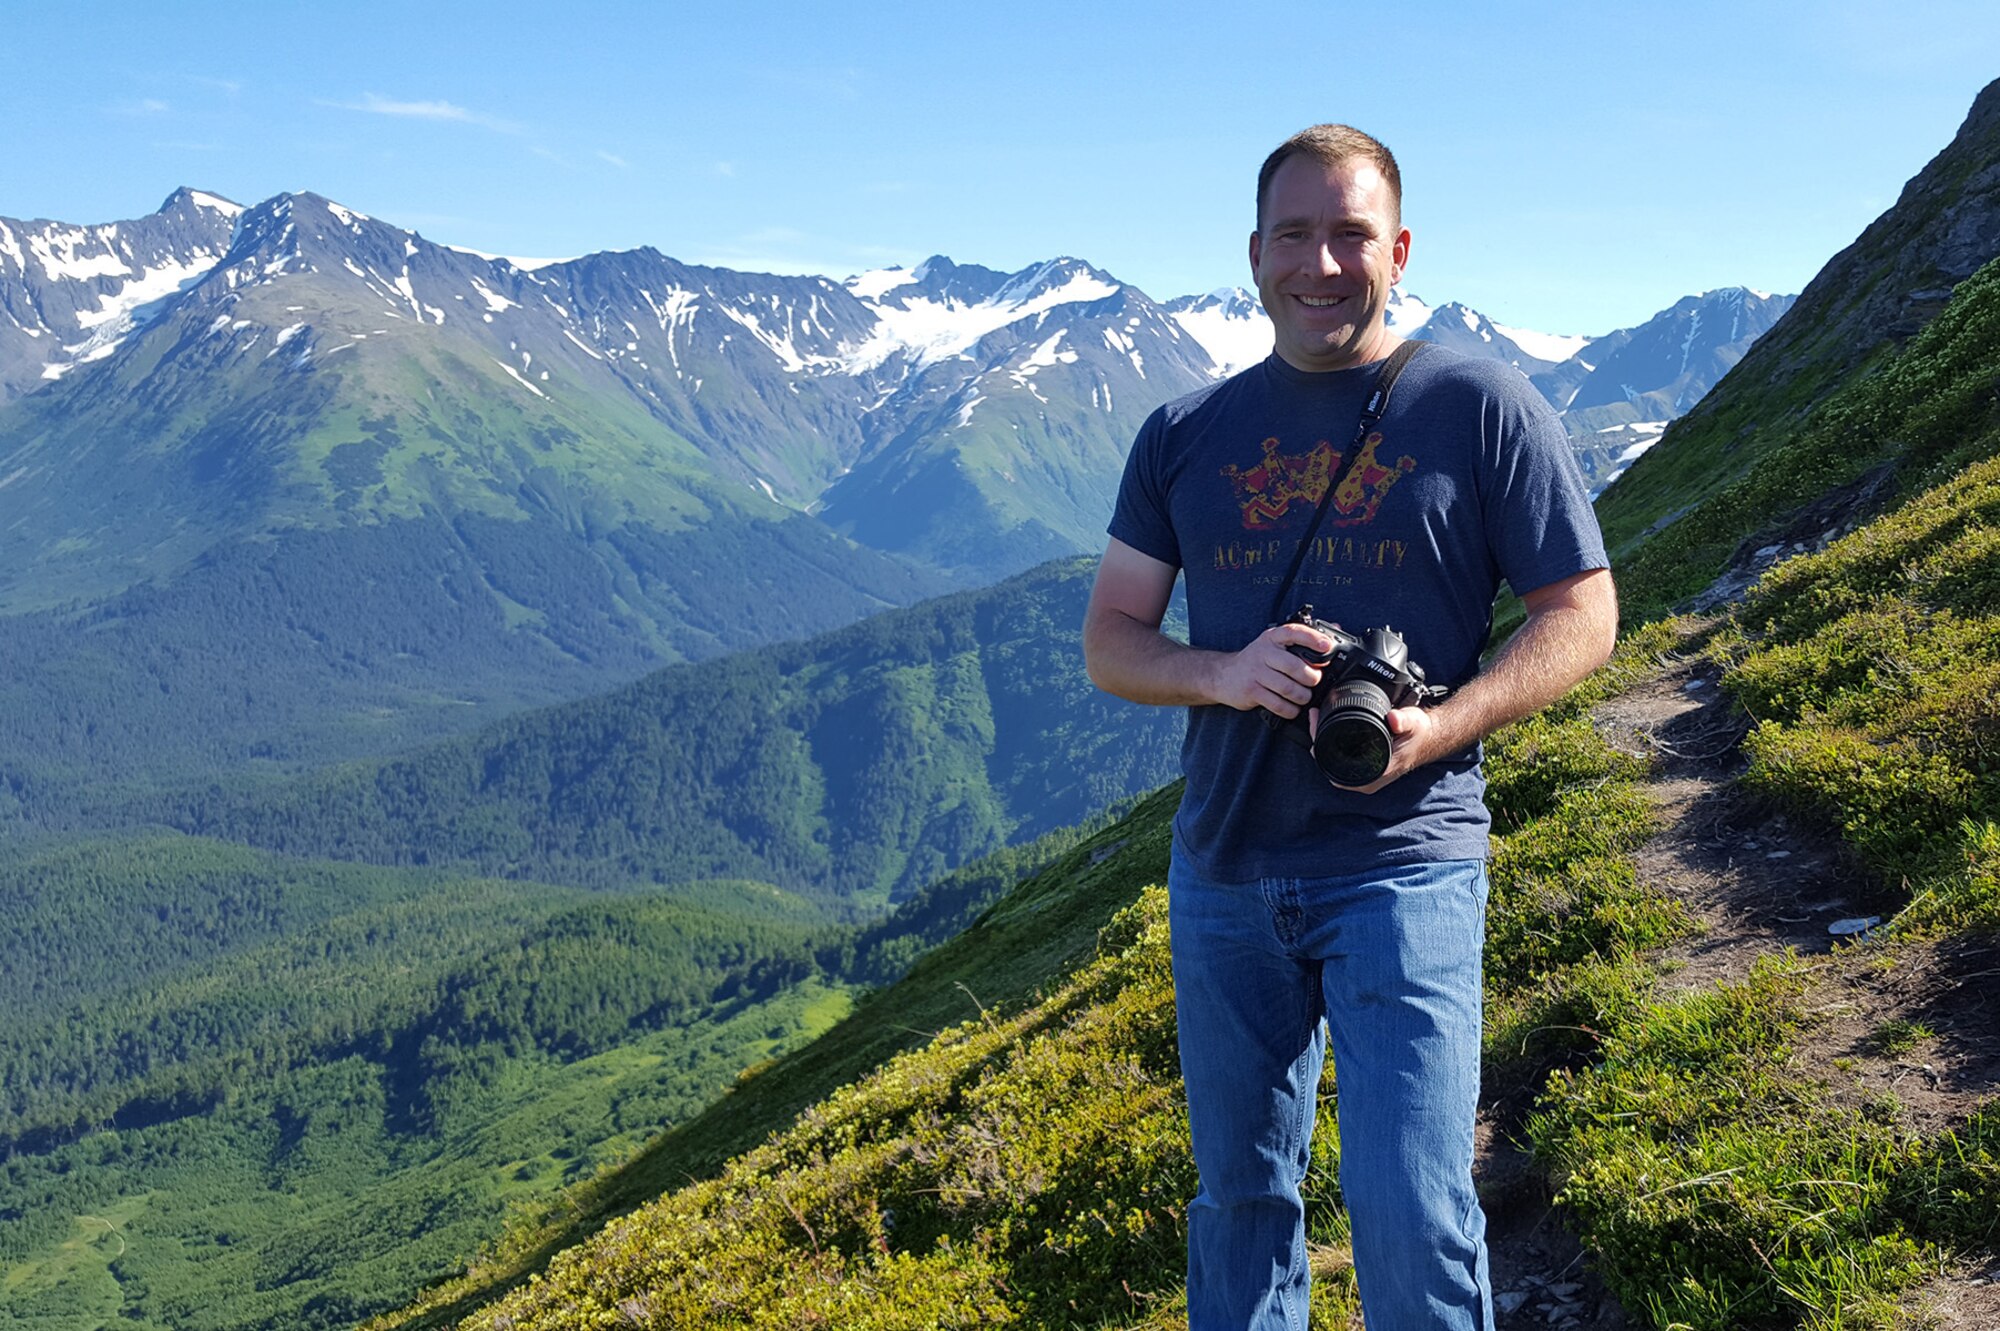 Master Sgt. Jerry Harlan, a photojournalist assigned to the I.G. Brown Training and Education Center, photographs landscapes, July 16, 2016, in Alyeska, Alaska. (U.S. Air National Guard photo by Tech. Sgt. Erik Gallion)